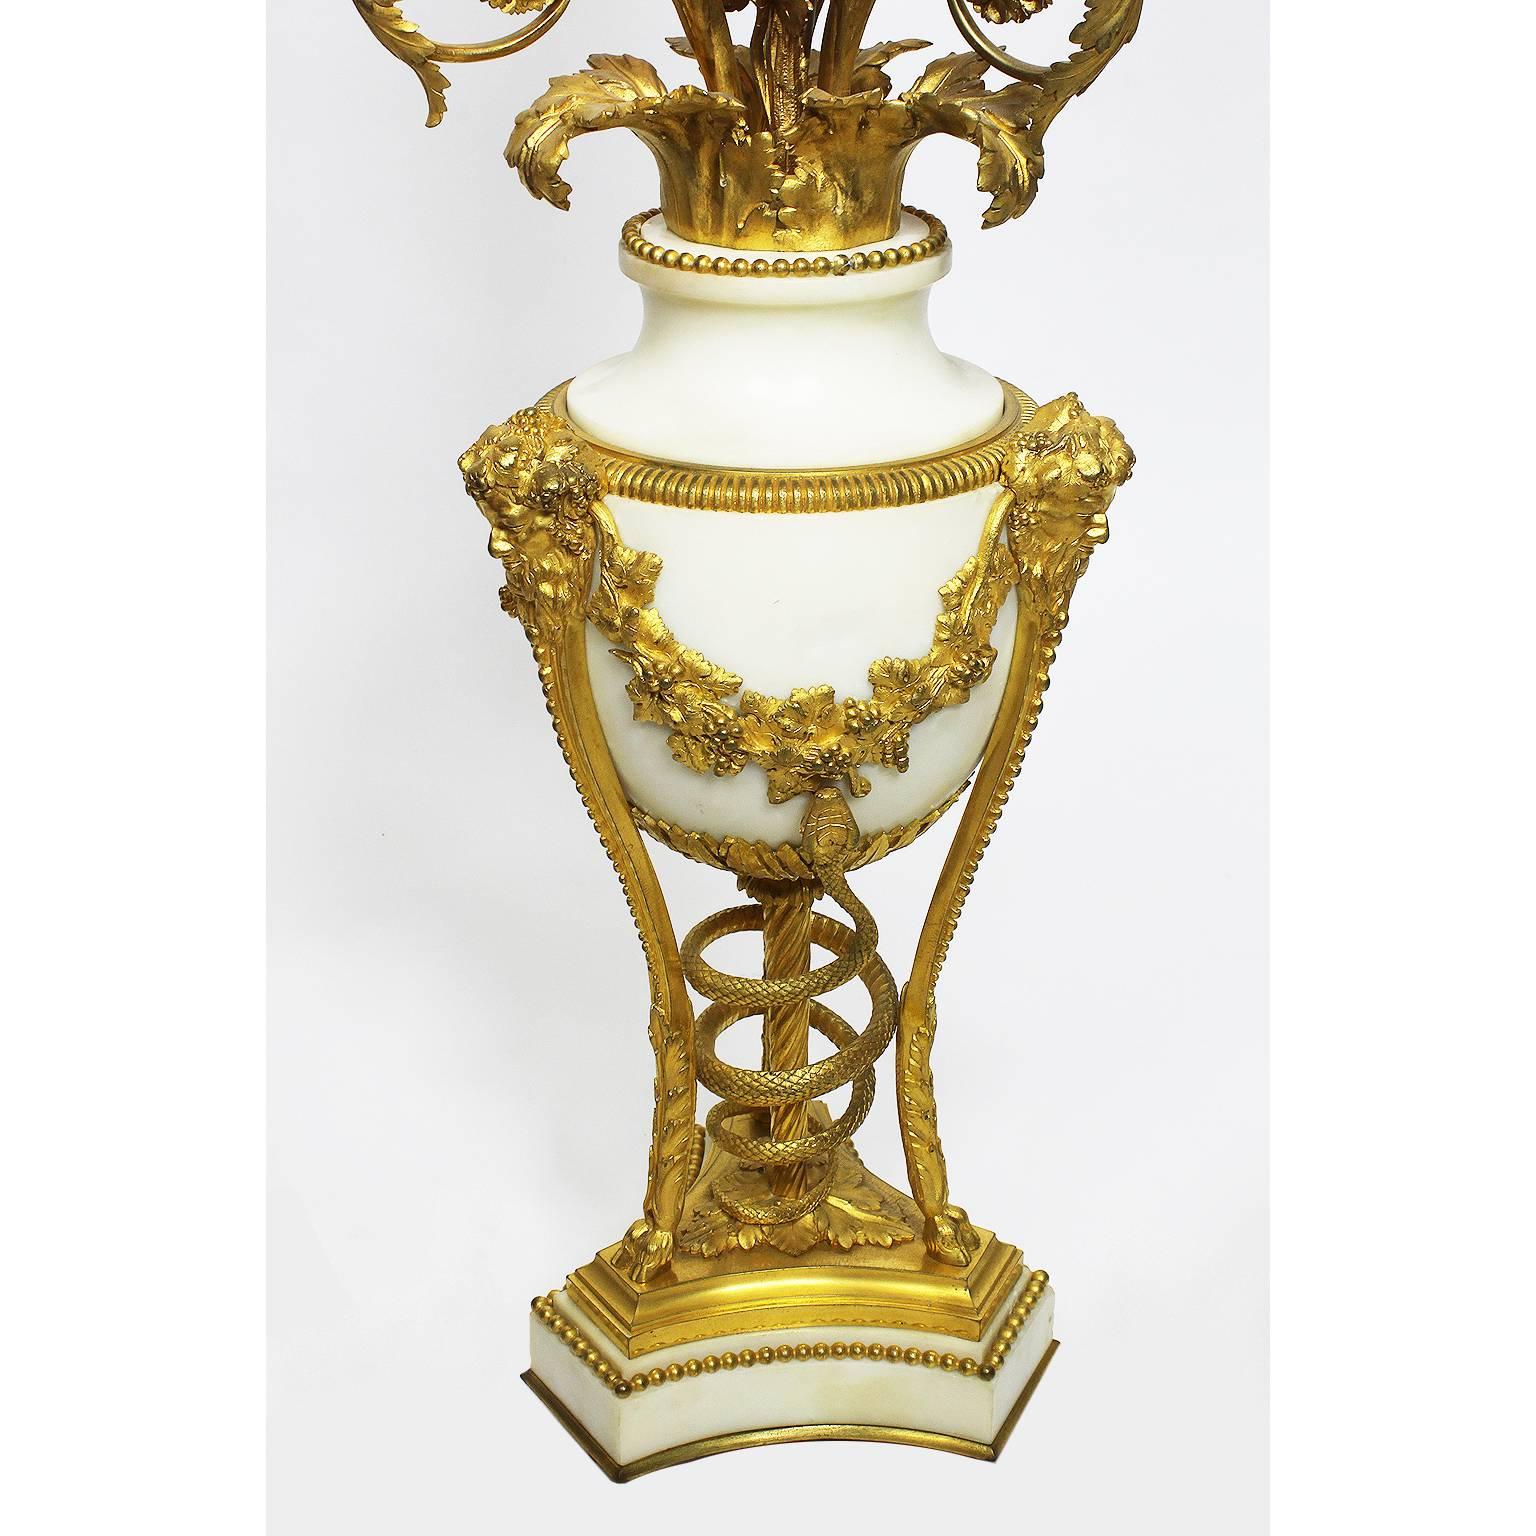 Alfred Emmanuel Louis Beurdeley (French, 1847-1919) A very fine pair of French 19th century Louis XVI style ormolu-mounted and white marble three-light candelabra (now electrified), each raised on tri-form cloven hoof topped feet below Bacchic